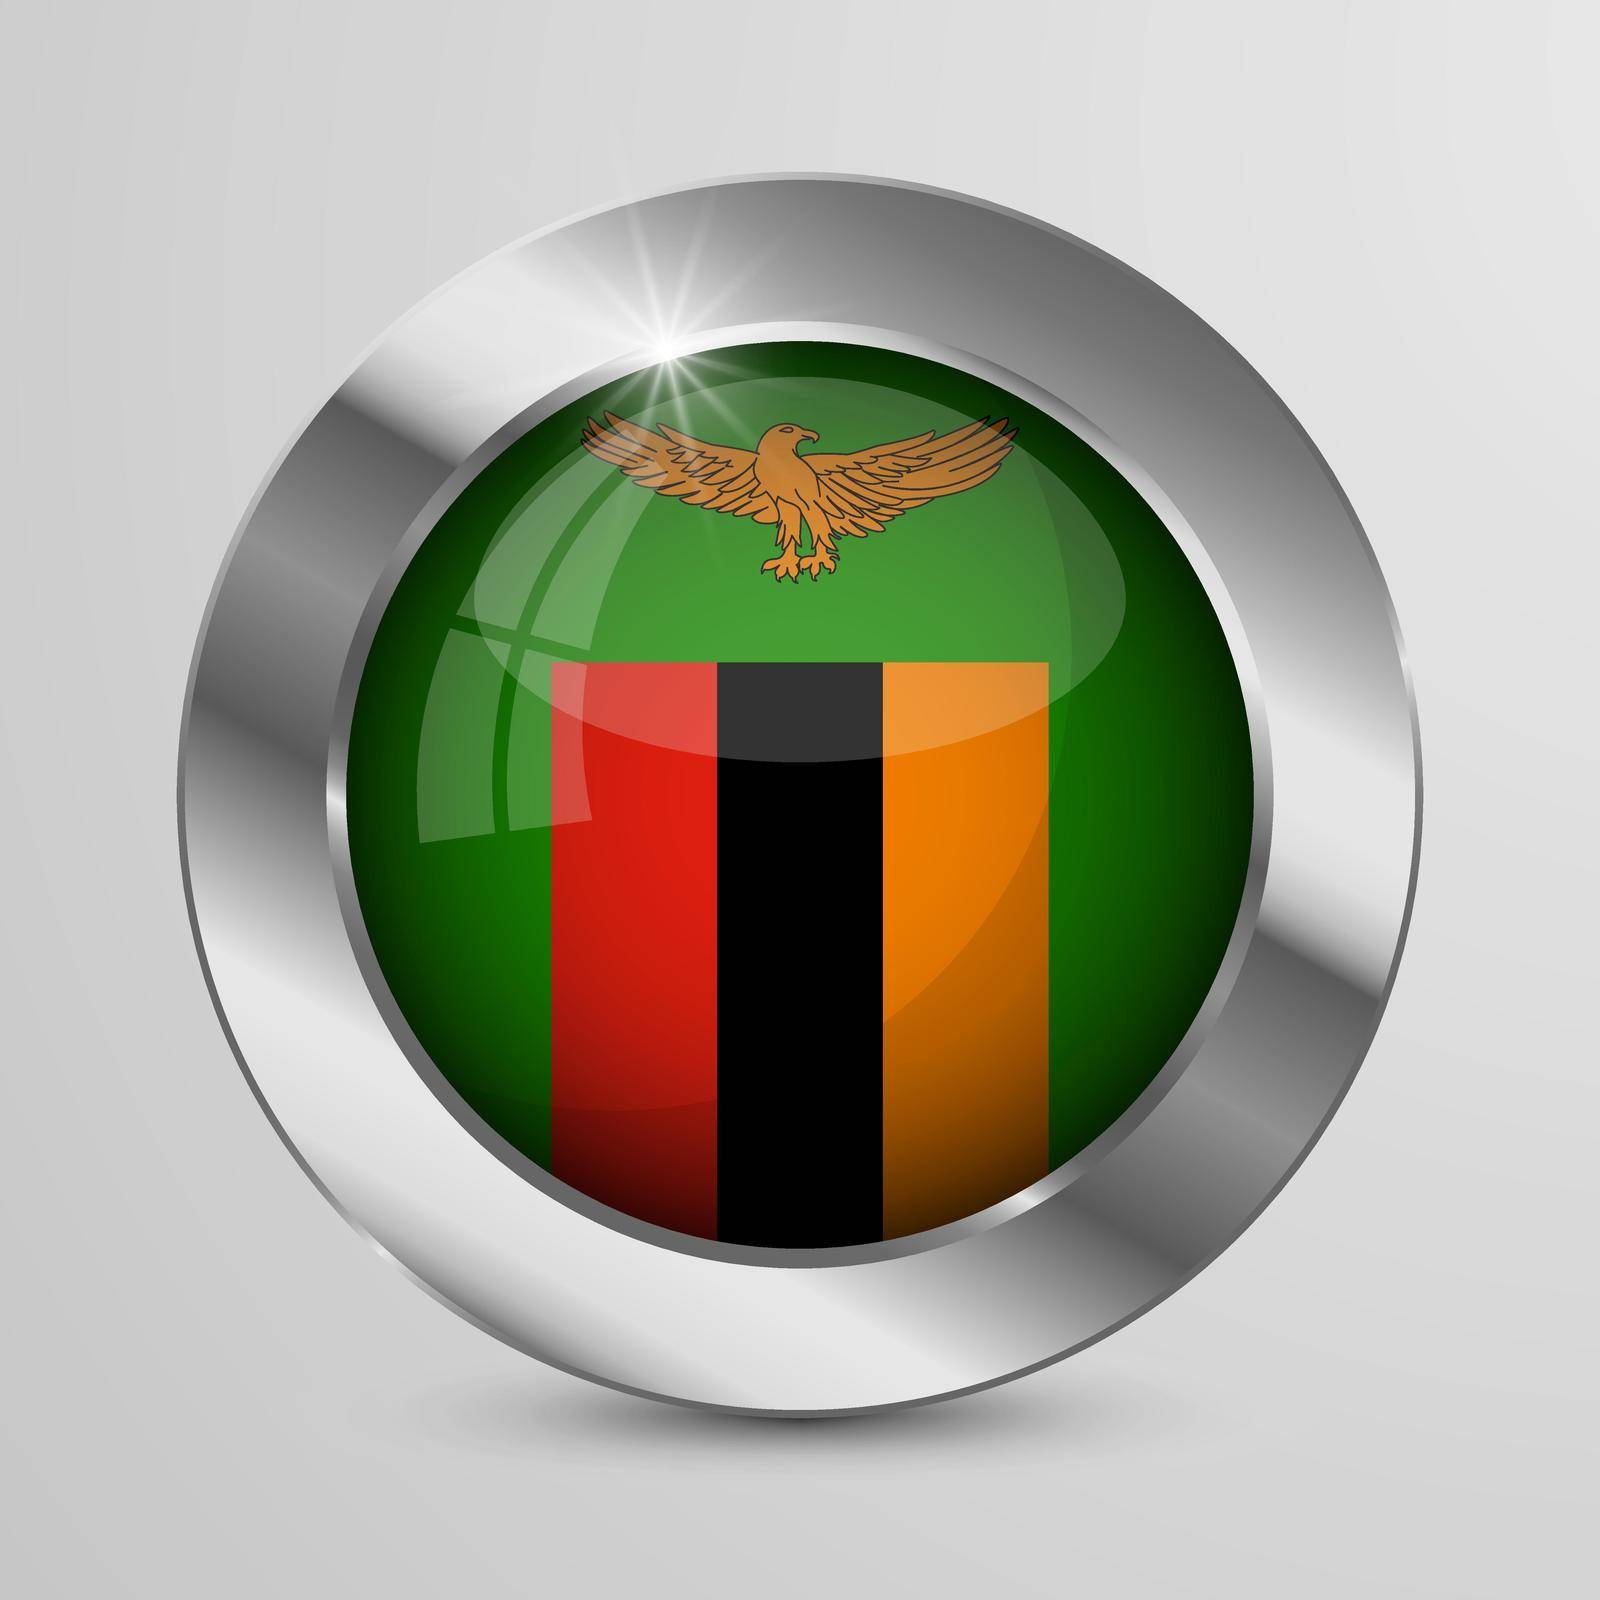 EPS10 Vector Patriotic Button with Zambia flag colors. An element of impact for the use you want to make of it.